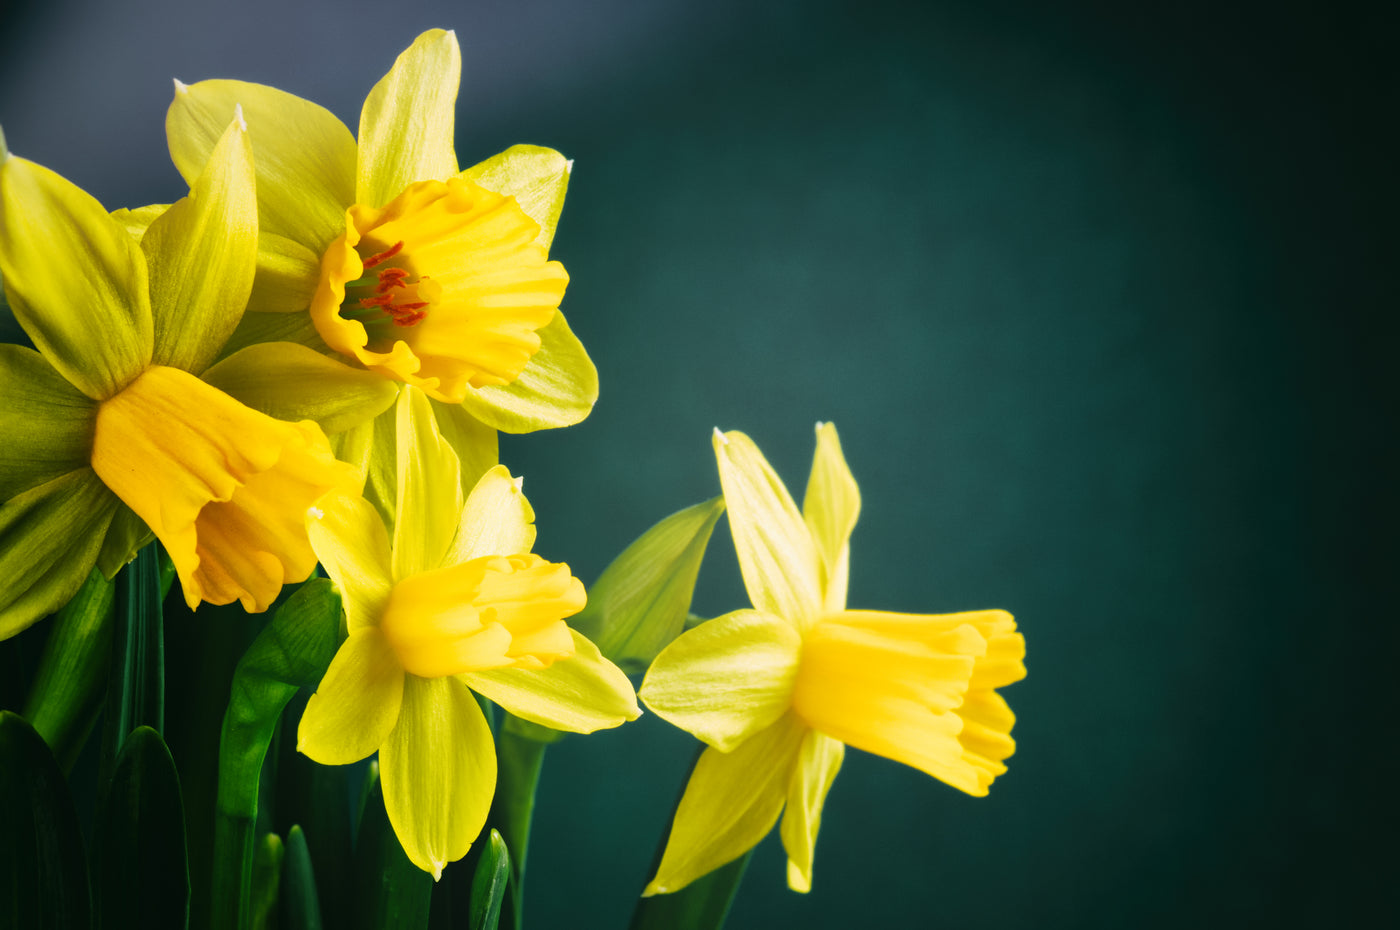 All There Is To Know About the Daffodil Flower